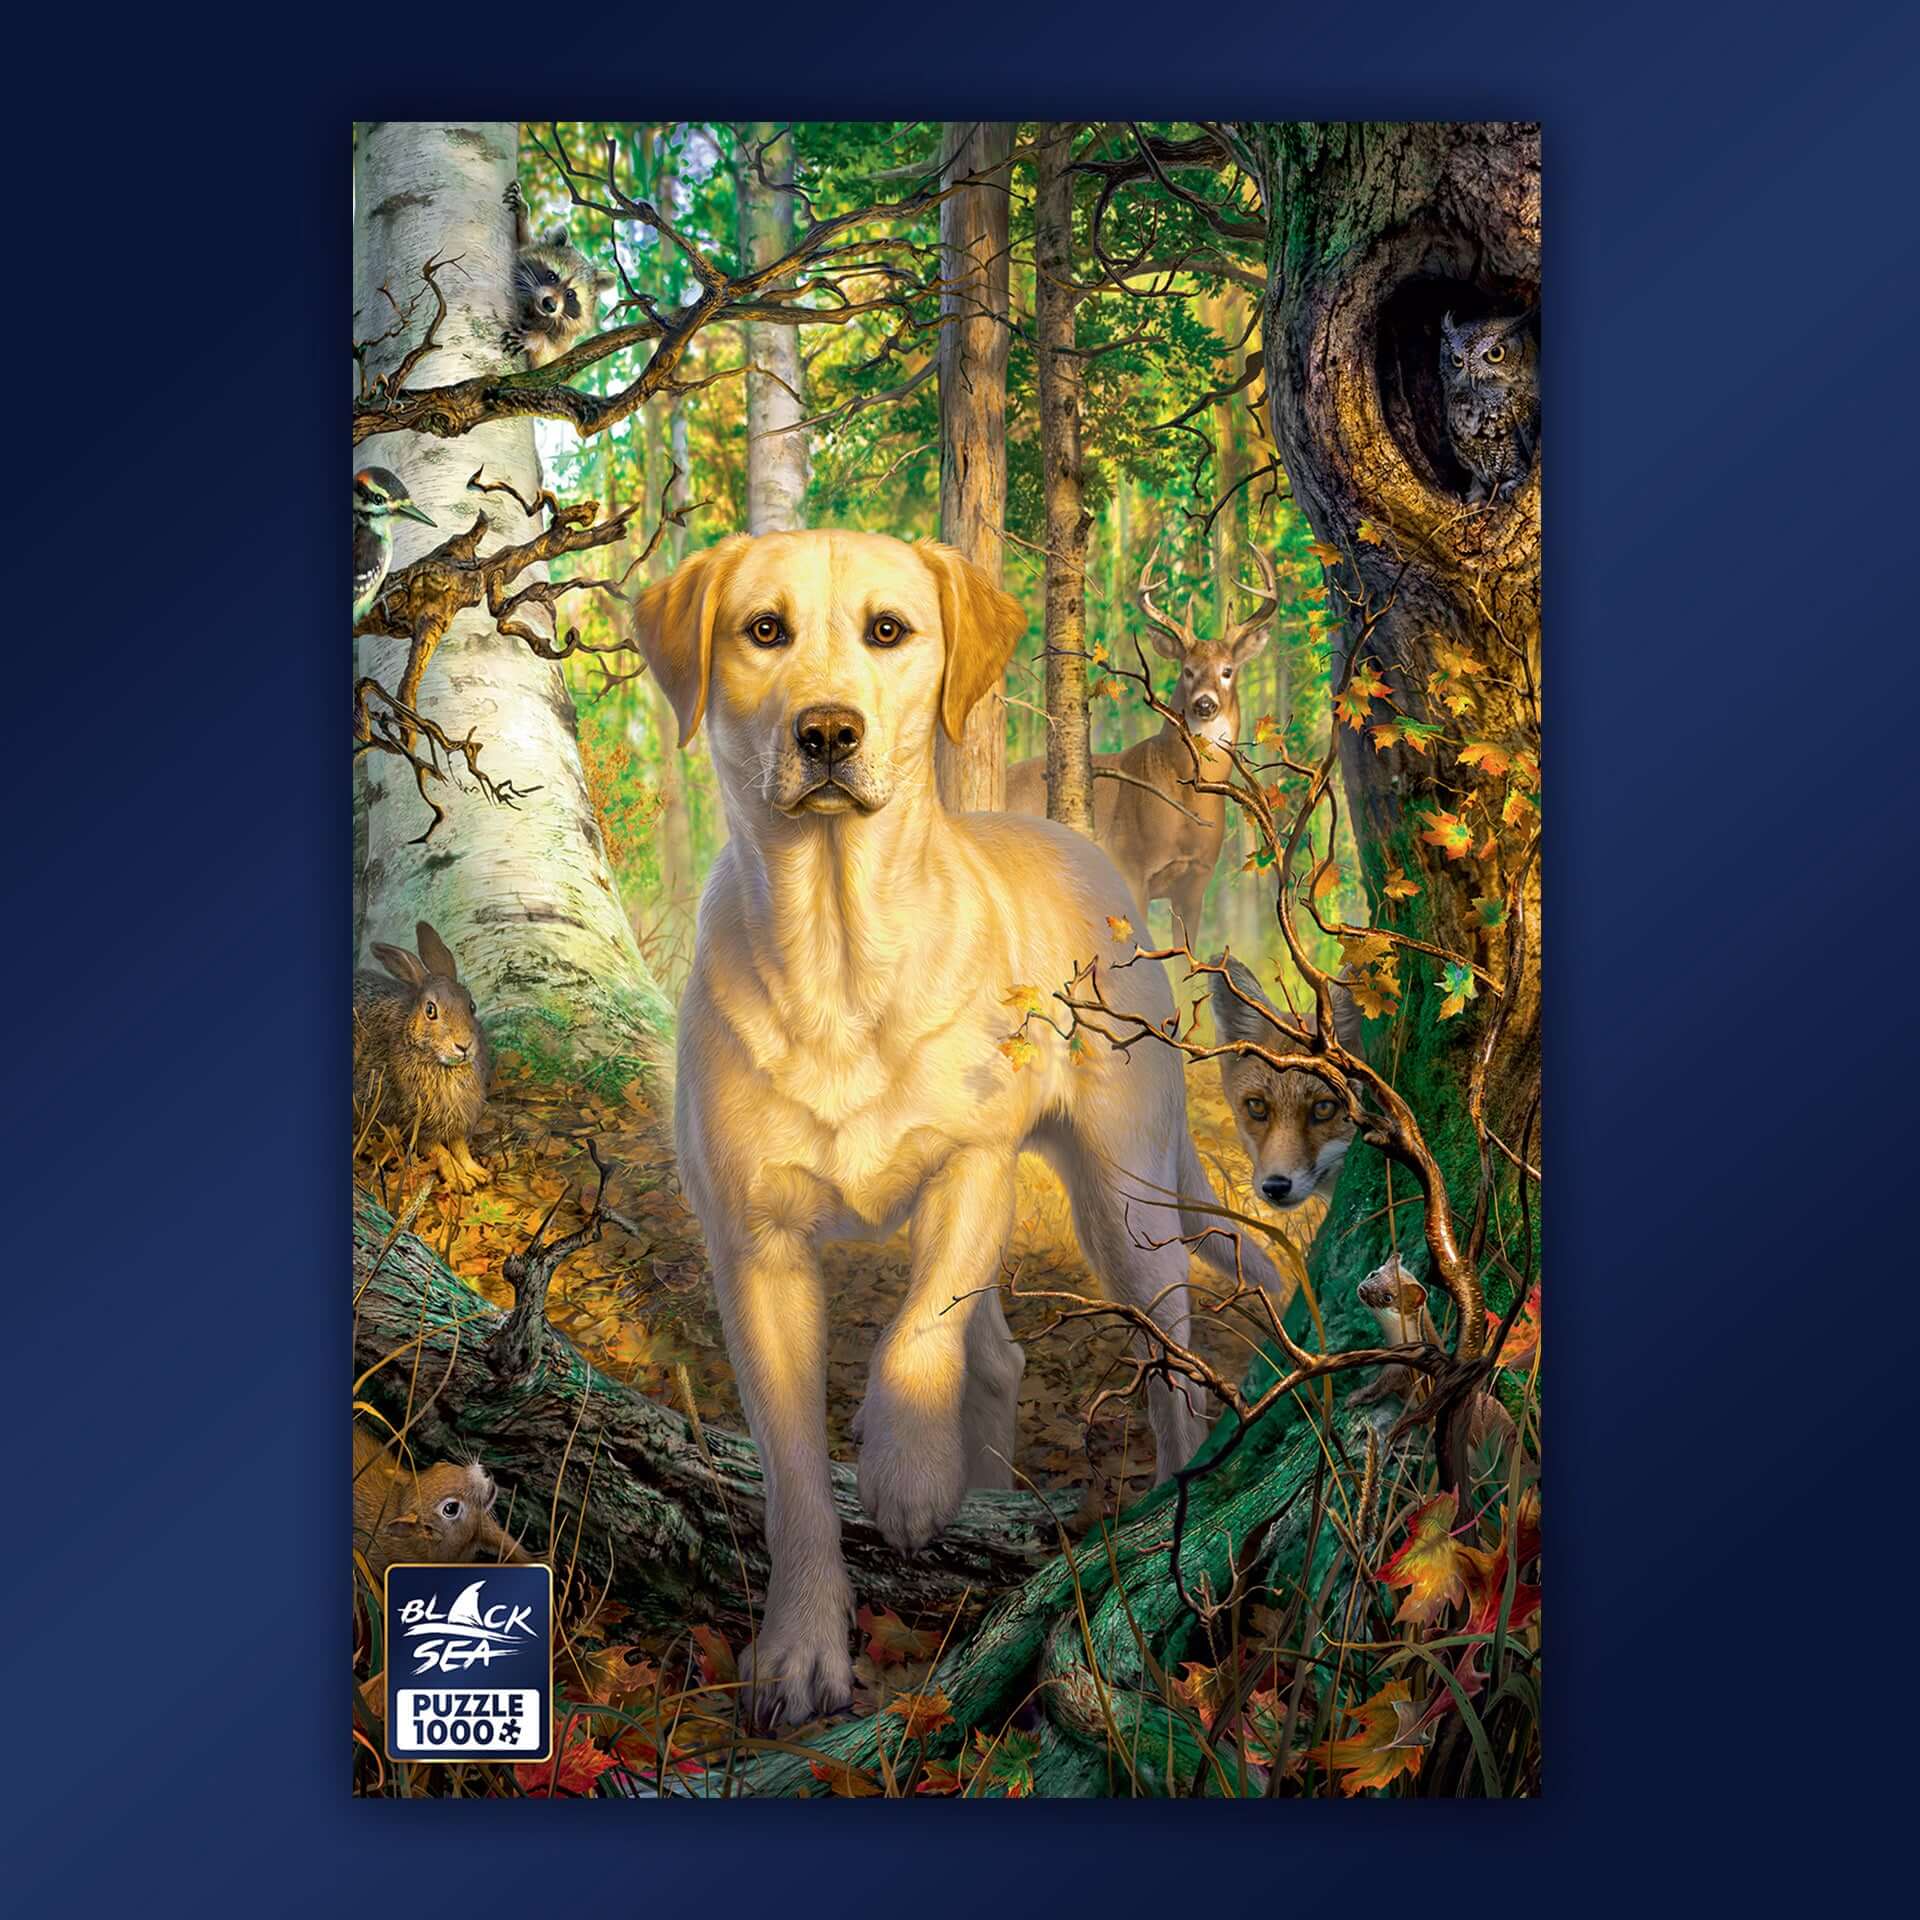 Puzzle Black Sea 1000 pieces - Forest adventure, Every day we choose a different trail across the woods so we add diversity to our route. But there is one trail we love; it is greener, beautiful, alive with forest wildlife. Me and my Labrador never miss t